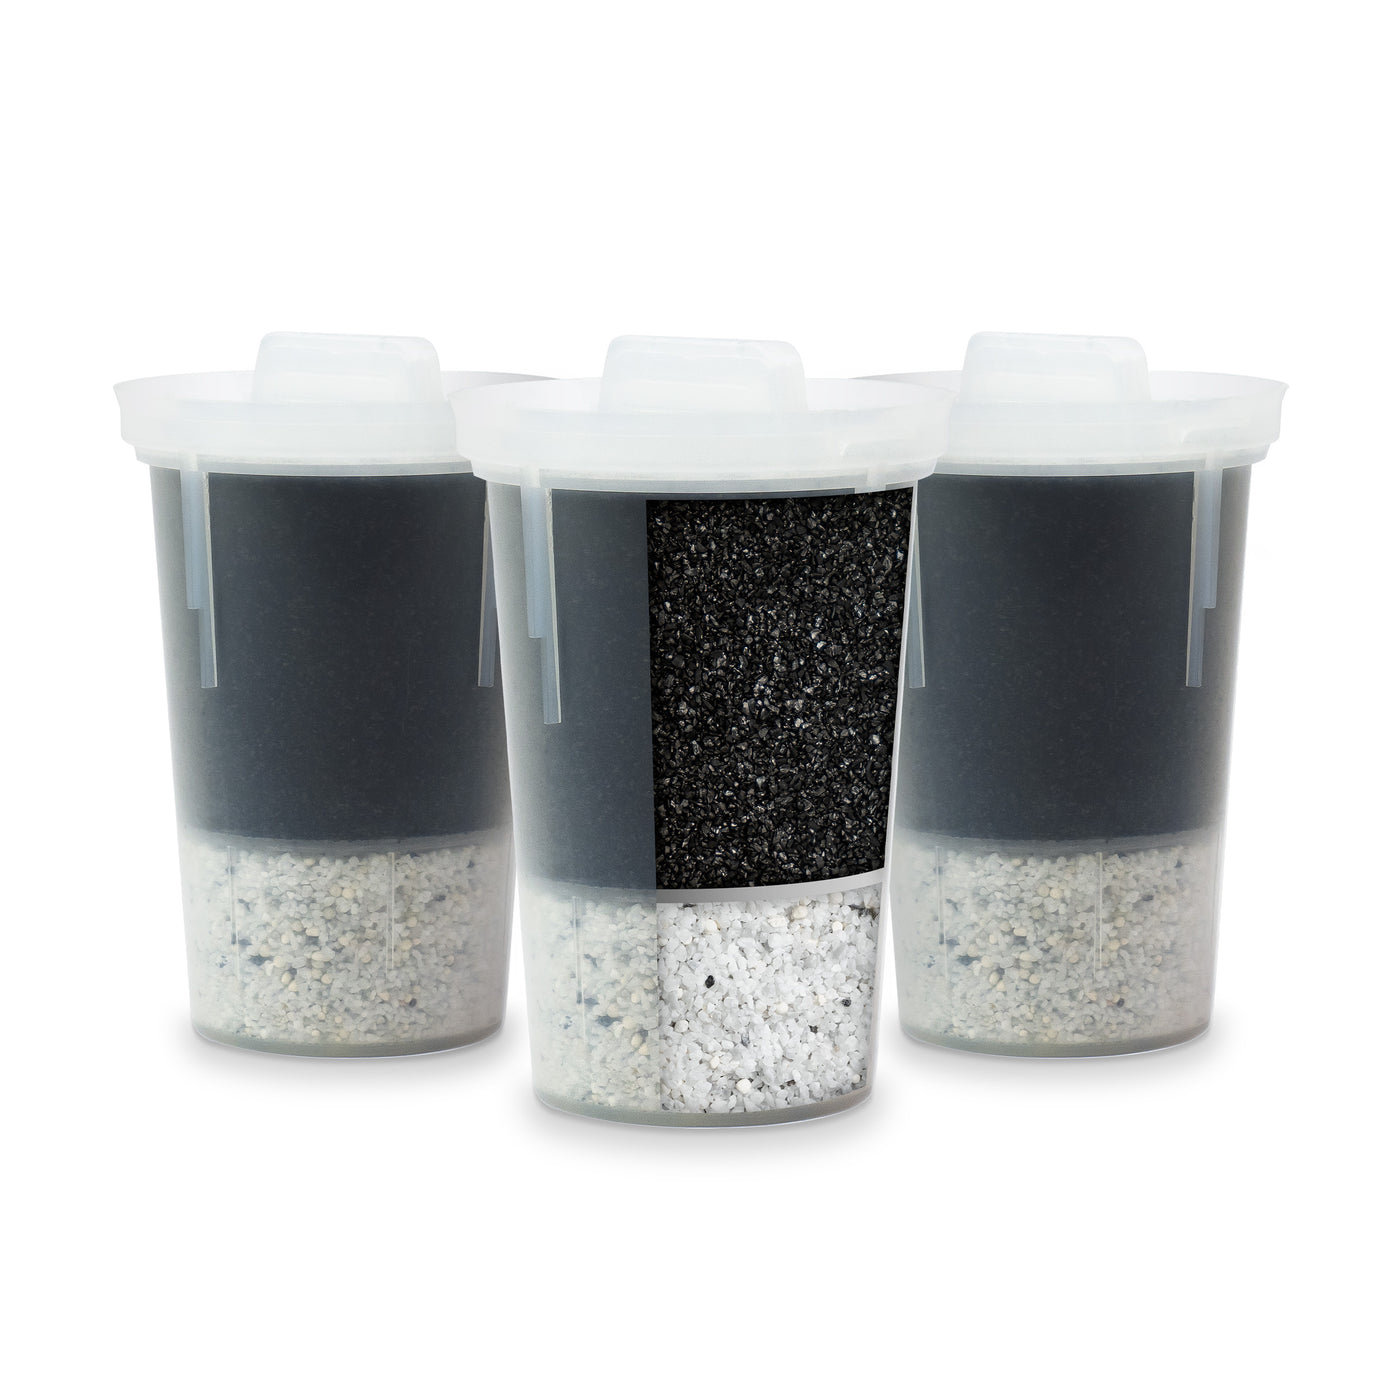 The Santevia MINA Alkaline Pitcher Filters come in a 3 unit value pack